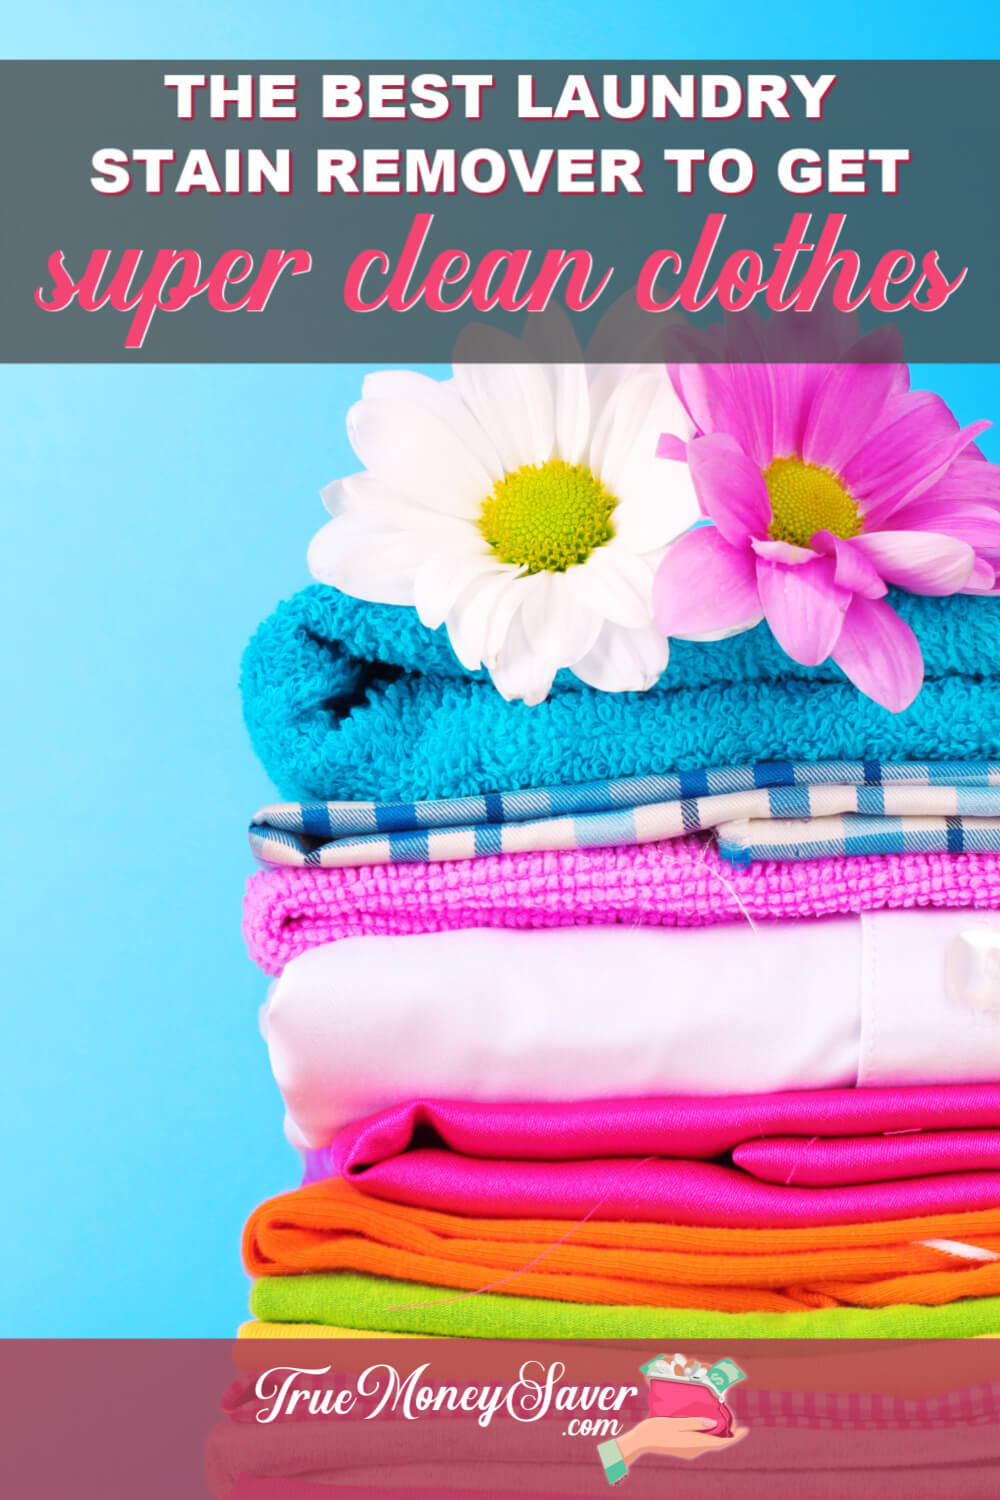 The Best Laundry Stain Remover To Get Your Clothes Super Clean